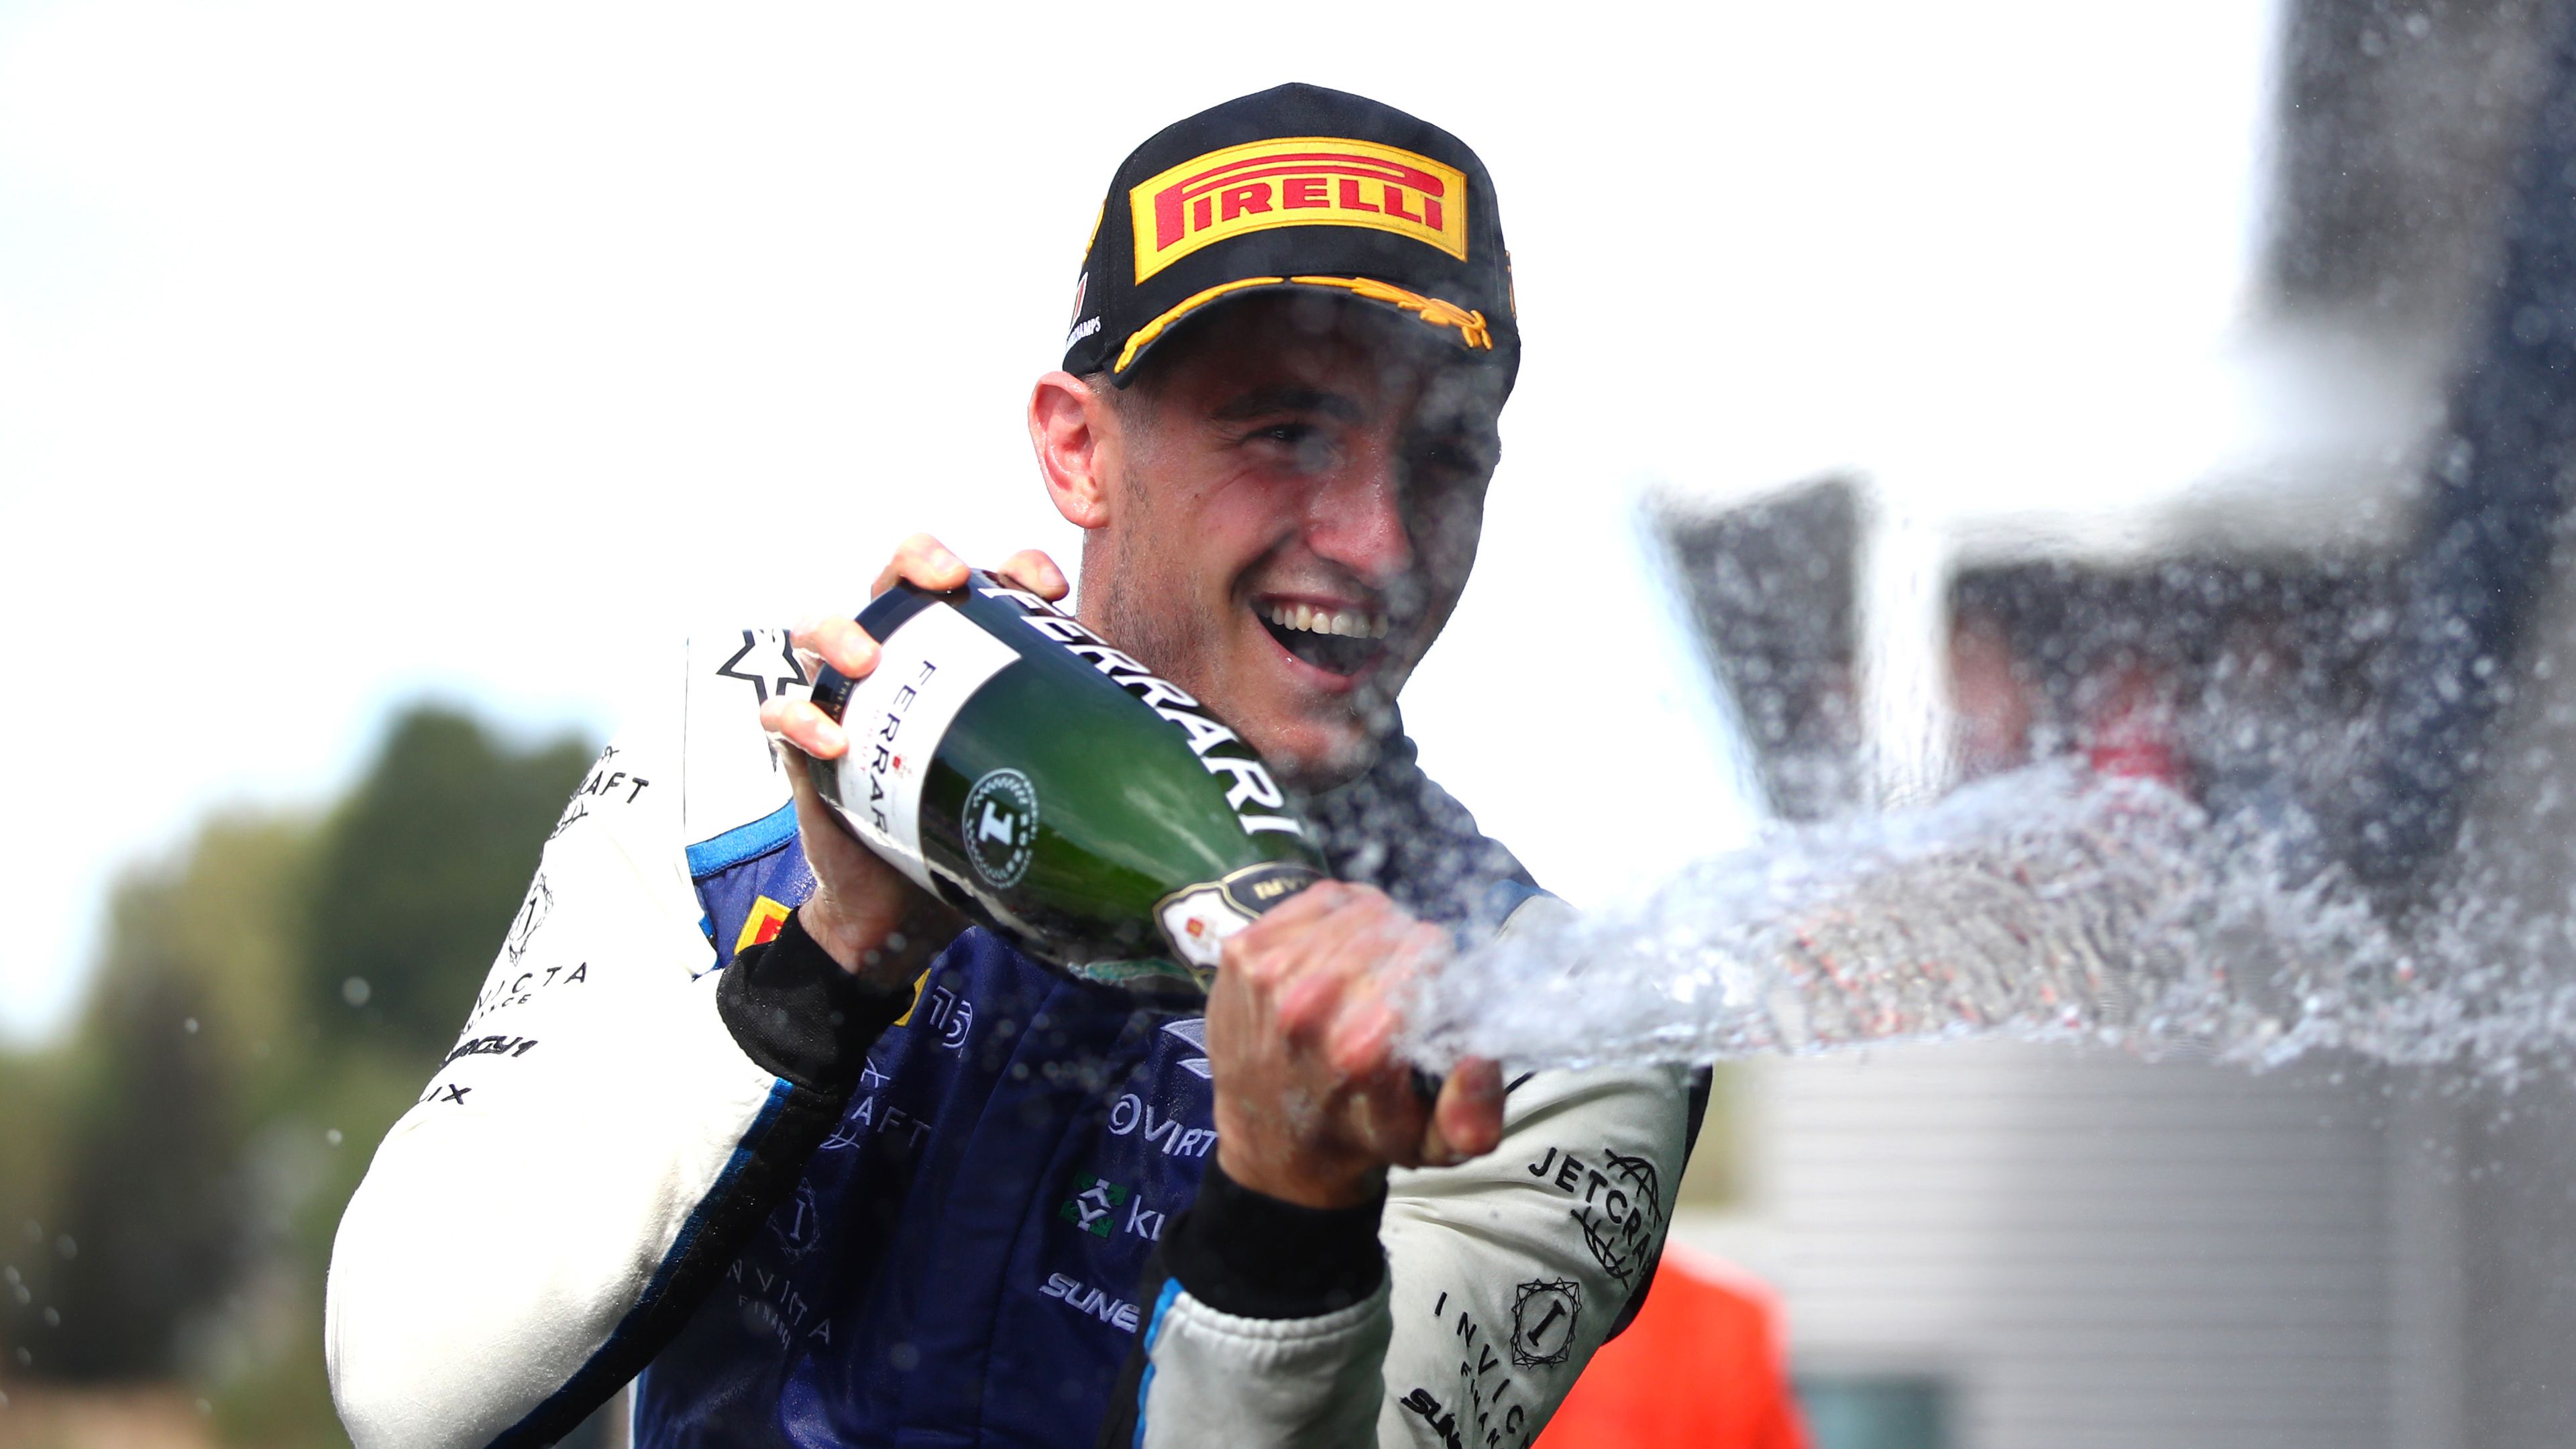 F2 driver Jack Doohan spraying champagne on the podium after winning the F2 feature race at the Belgian grand prix.